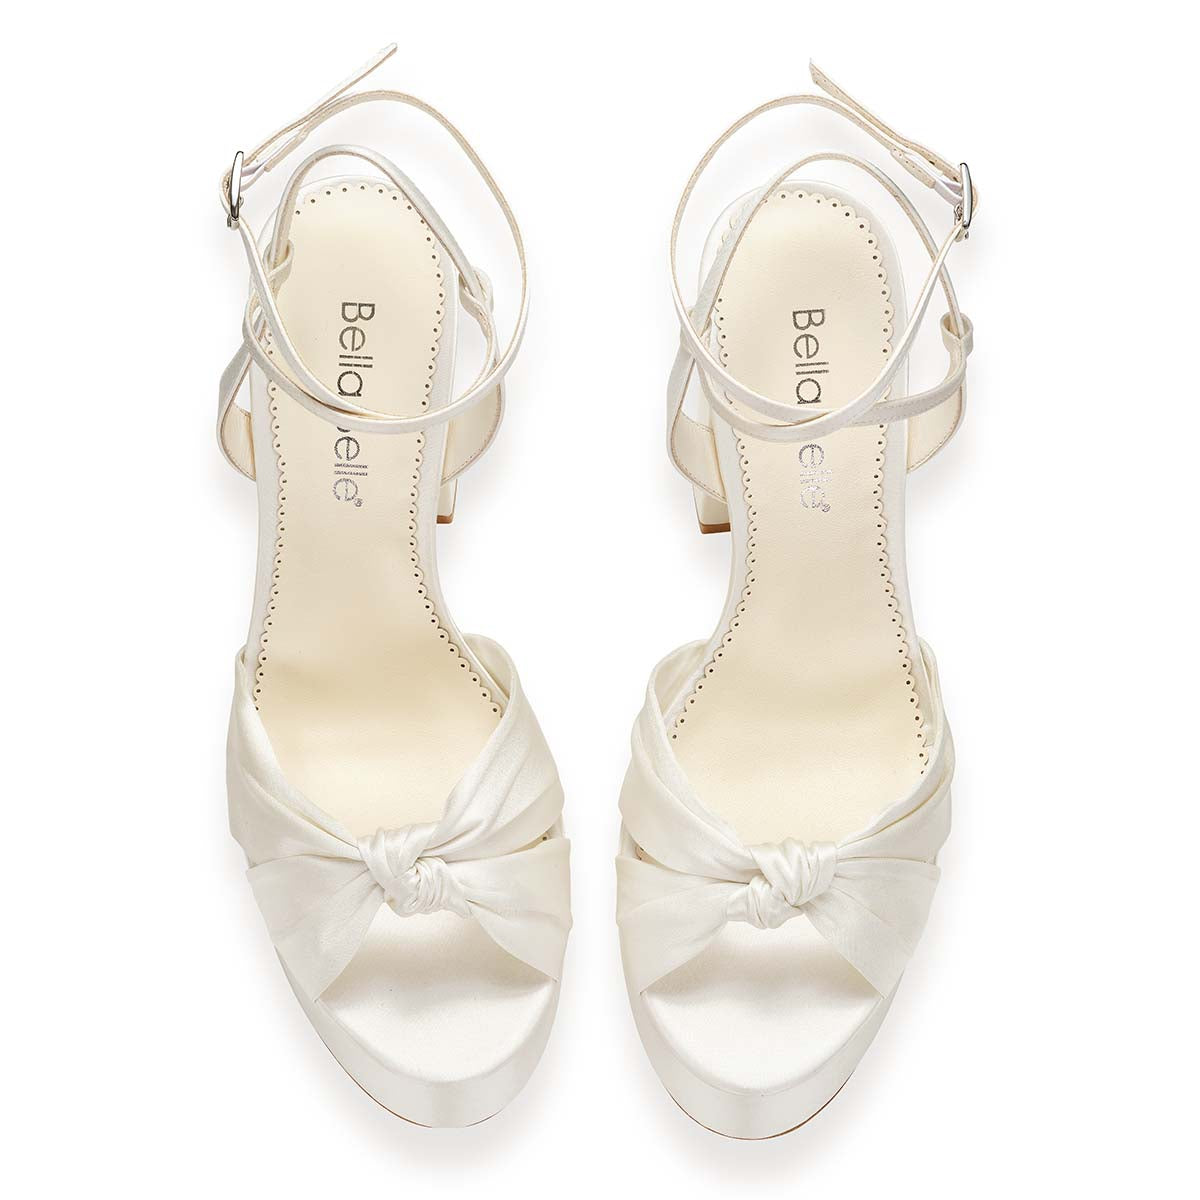 Bridal Holly leather platforms sandals in white - Gianvito Rossi | Mytheresa